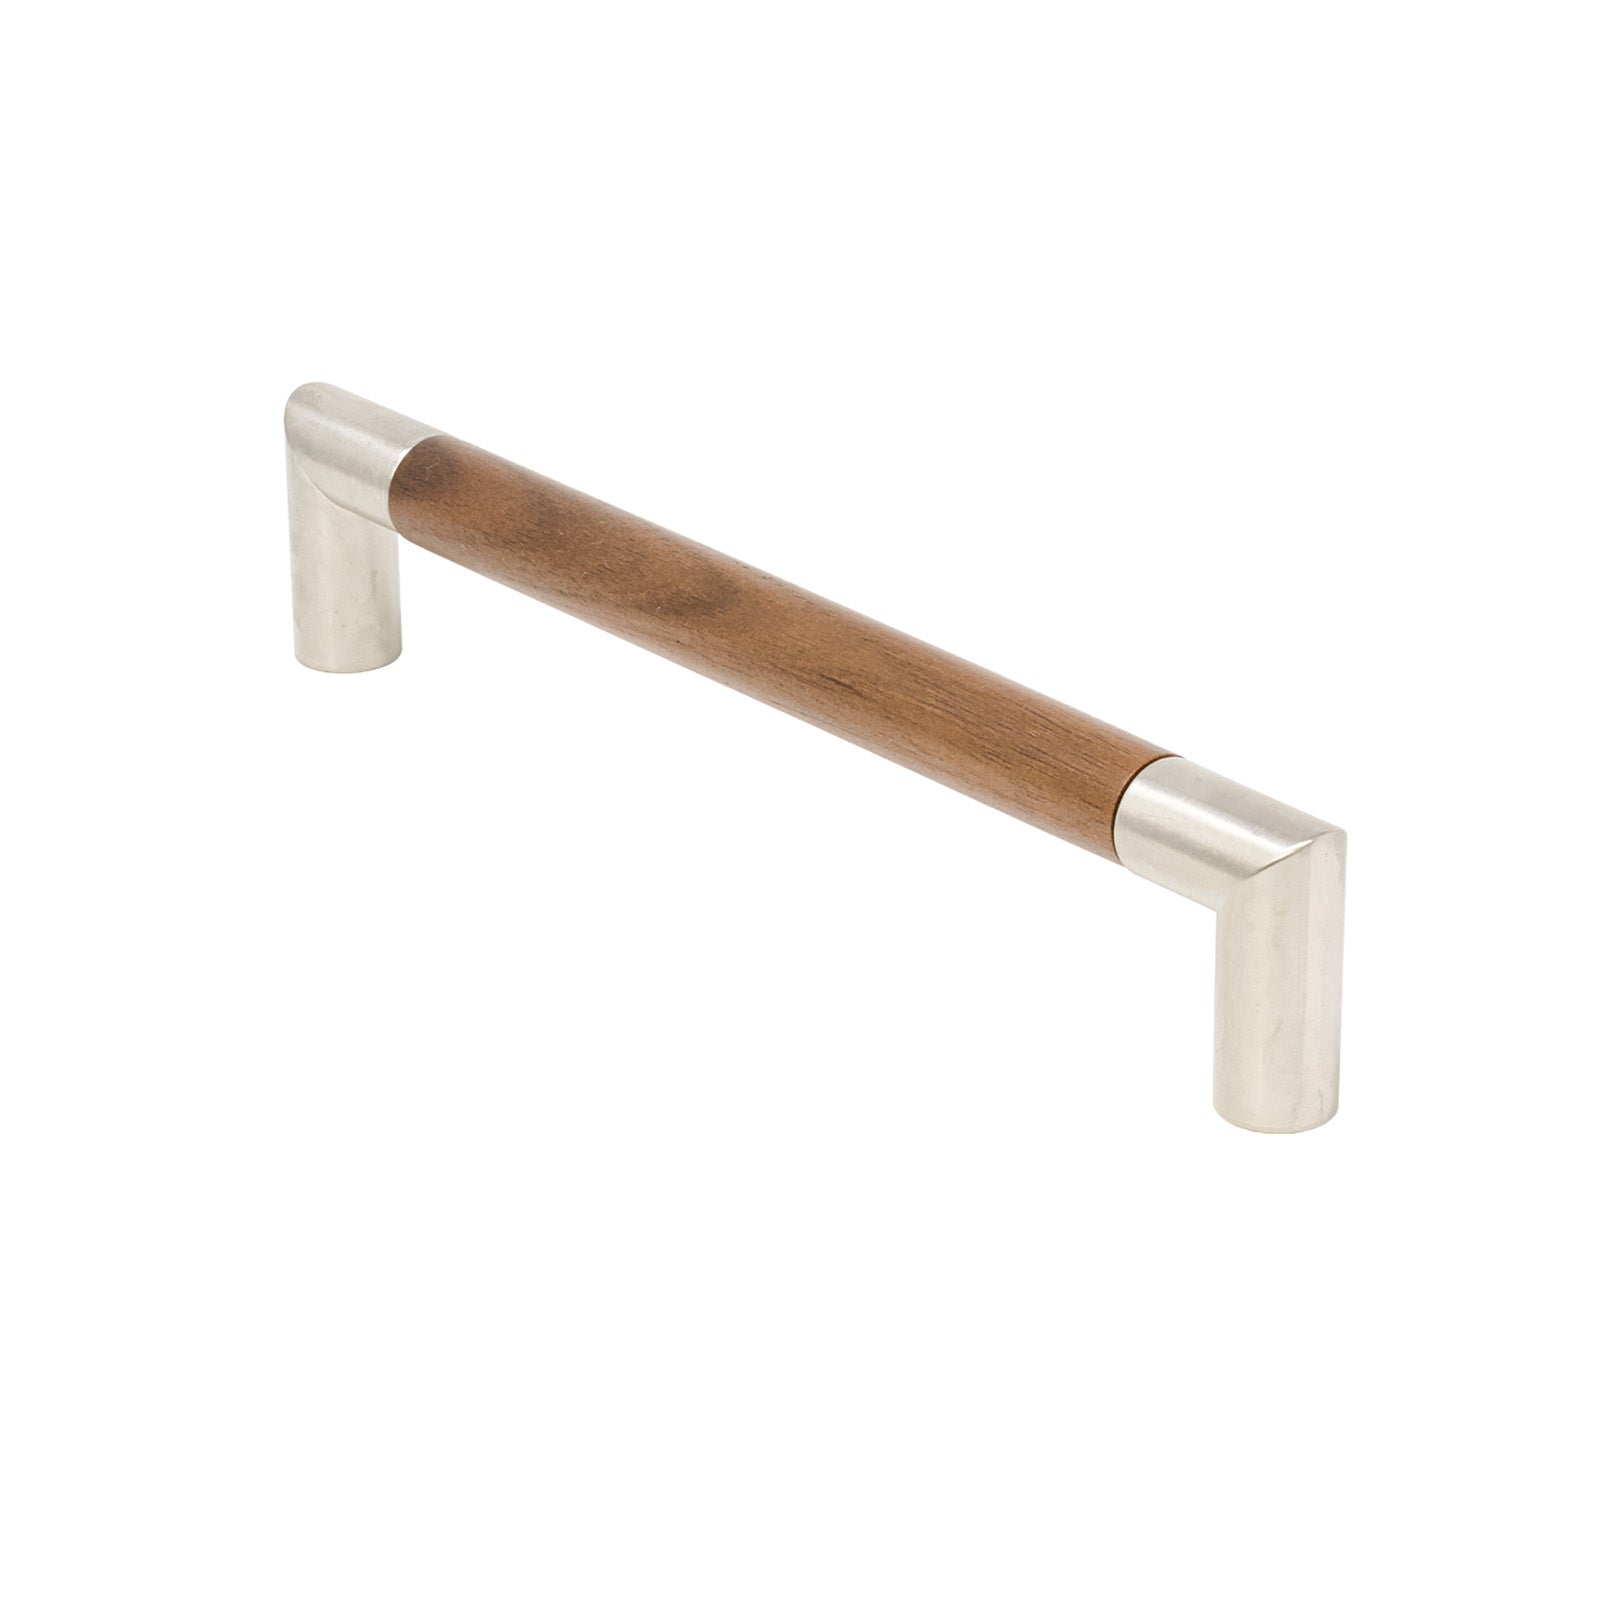 SHOW Angle Cabinet Pull Handle in Walnut finish